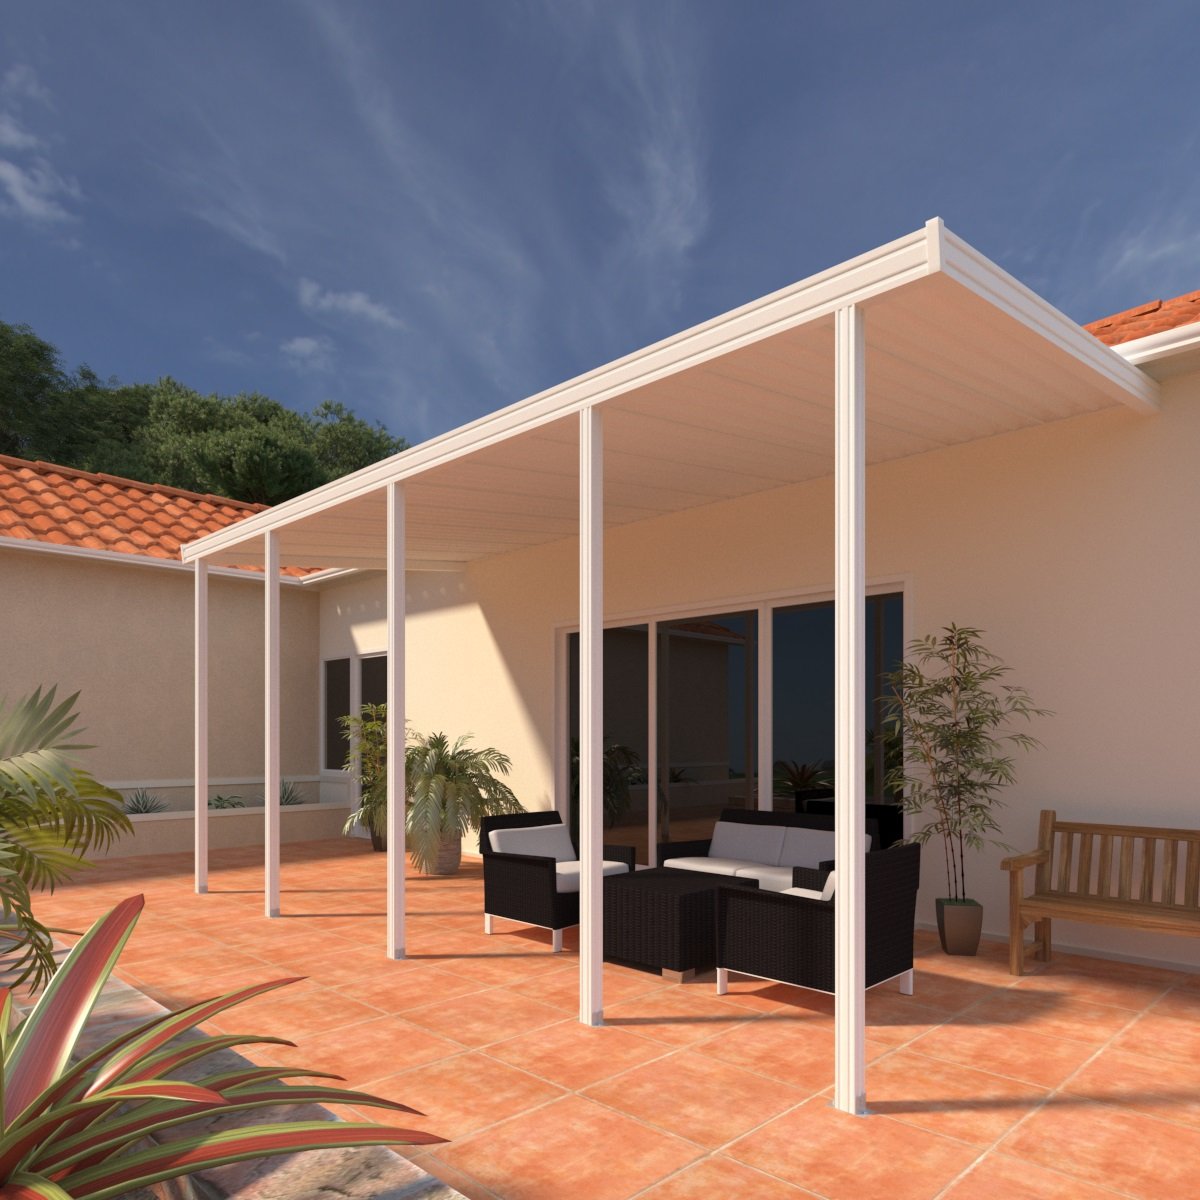 10 ft. Deep x 40 ft. Wide White Attached Aluminum Patio Cover -5 Posts - (10lb Low Snow Area)